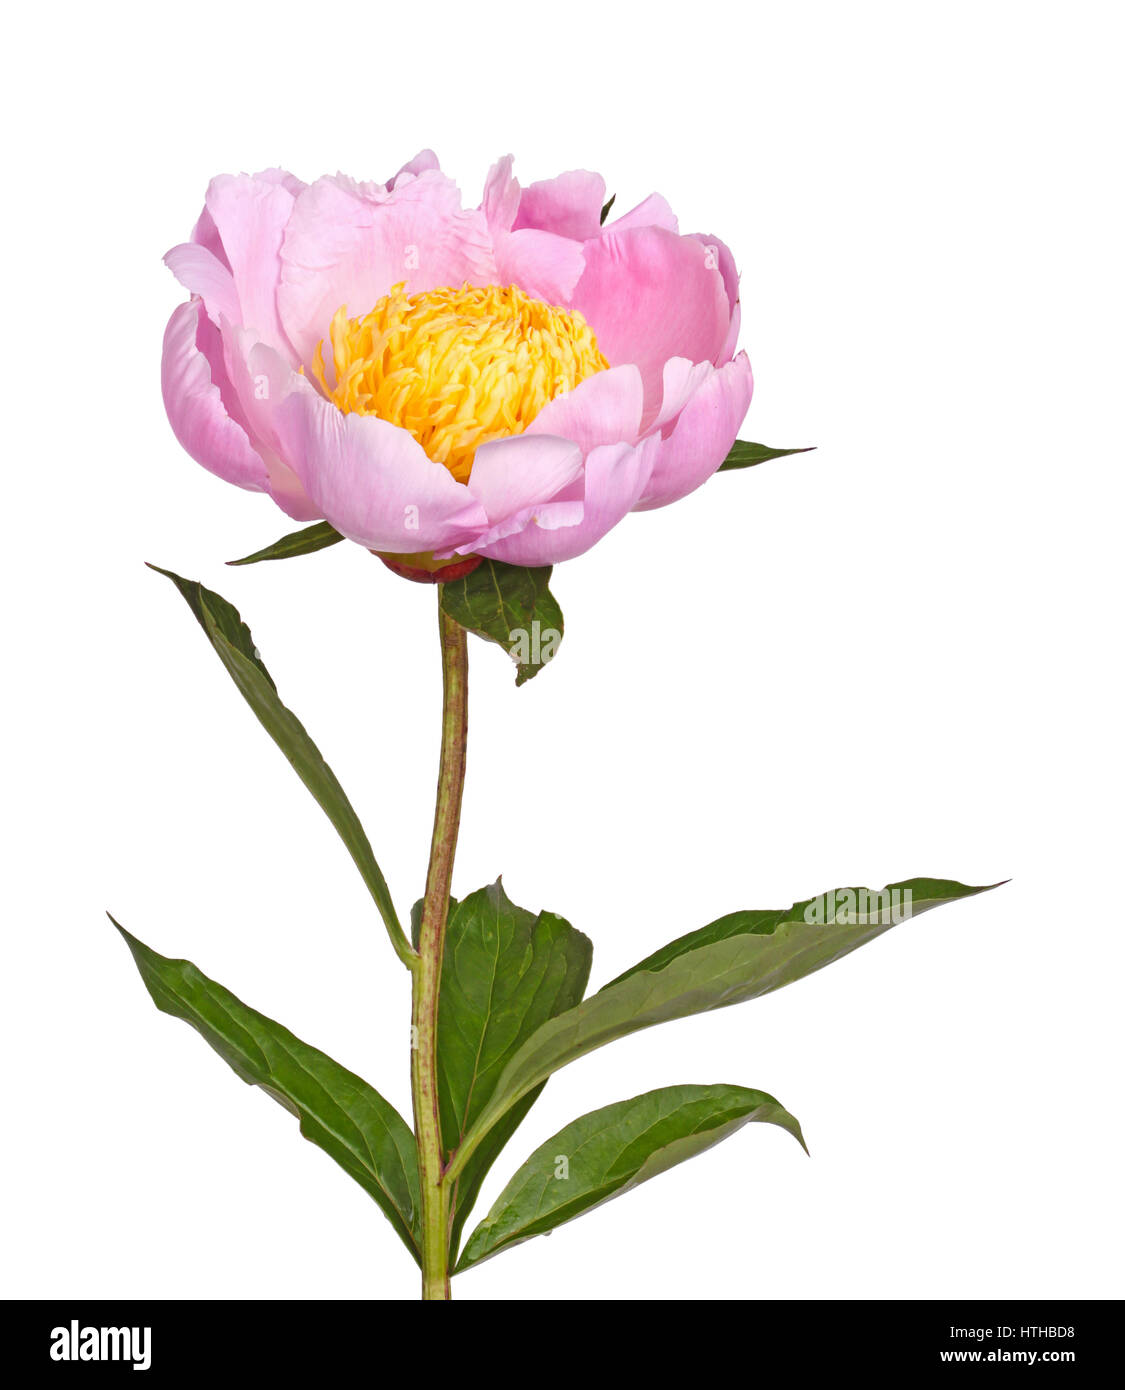 Stem, leaves and flower of a single pink peony with bright yellow stamens isolated against a white background Stock Photo